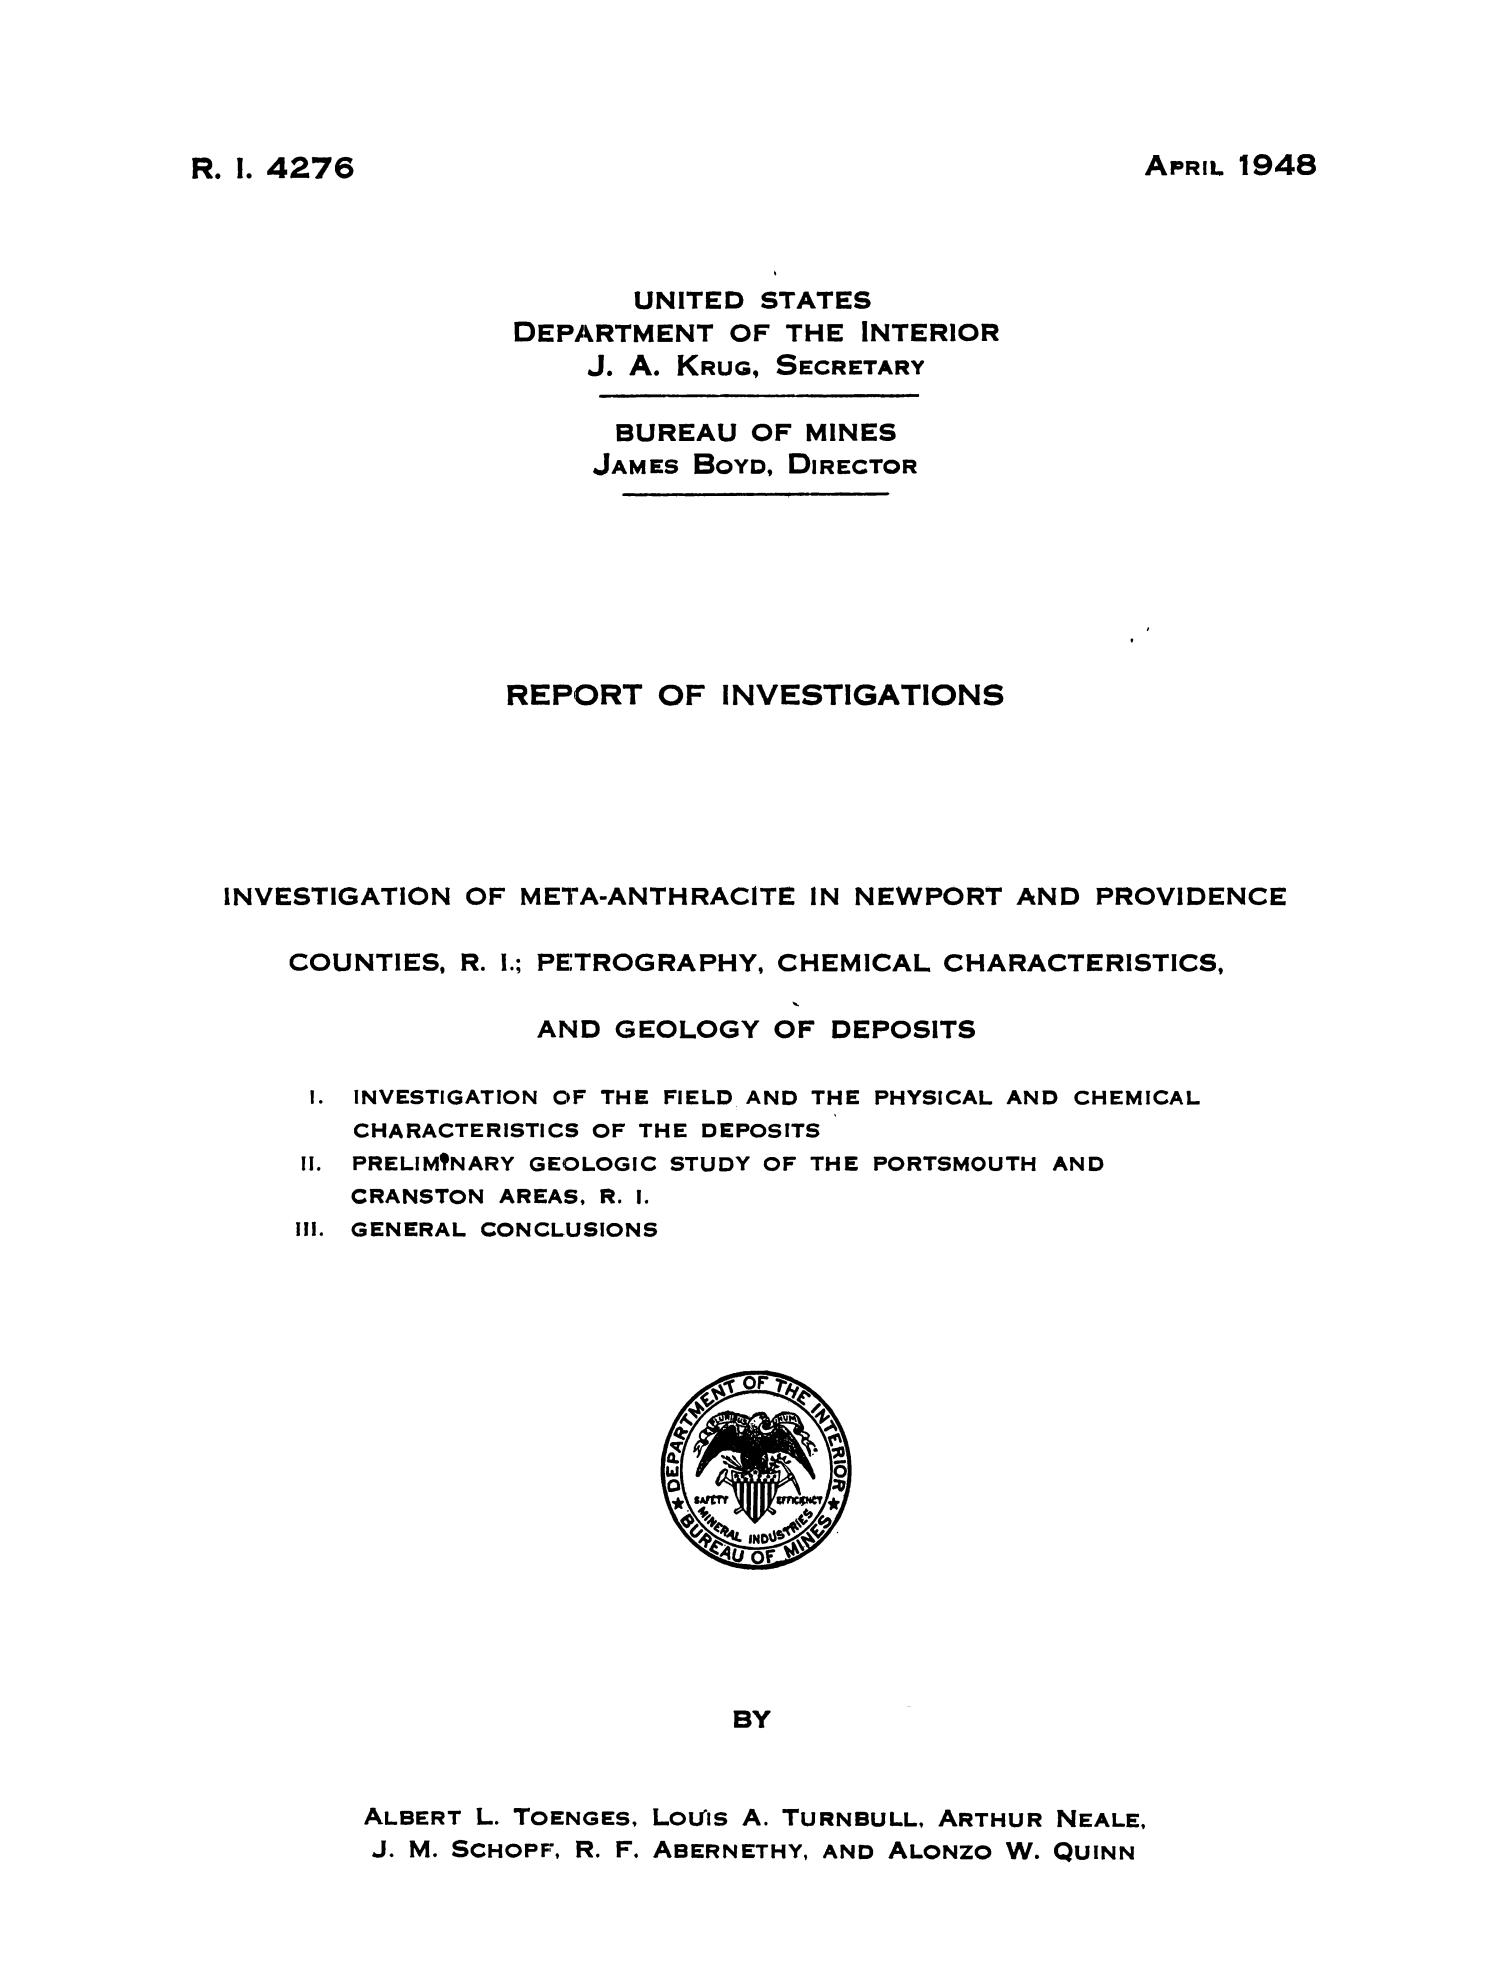 Investigation of Meta-Anthracite in Newport and Providence Counties, Rhode Island: Petrography, Chemical Characteristics, and Geology of Deposits: I. Investigation of the Field and the Physical and Chemical Characteristics of the Deposits; II. Preliminary Geologic Study of the Portsmouth and Cranston Areas, Rhode Island; III. General Conclusions
                                                
                                                    Front Cover
                                                